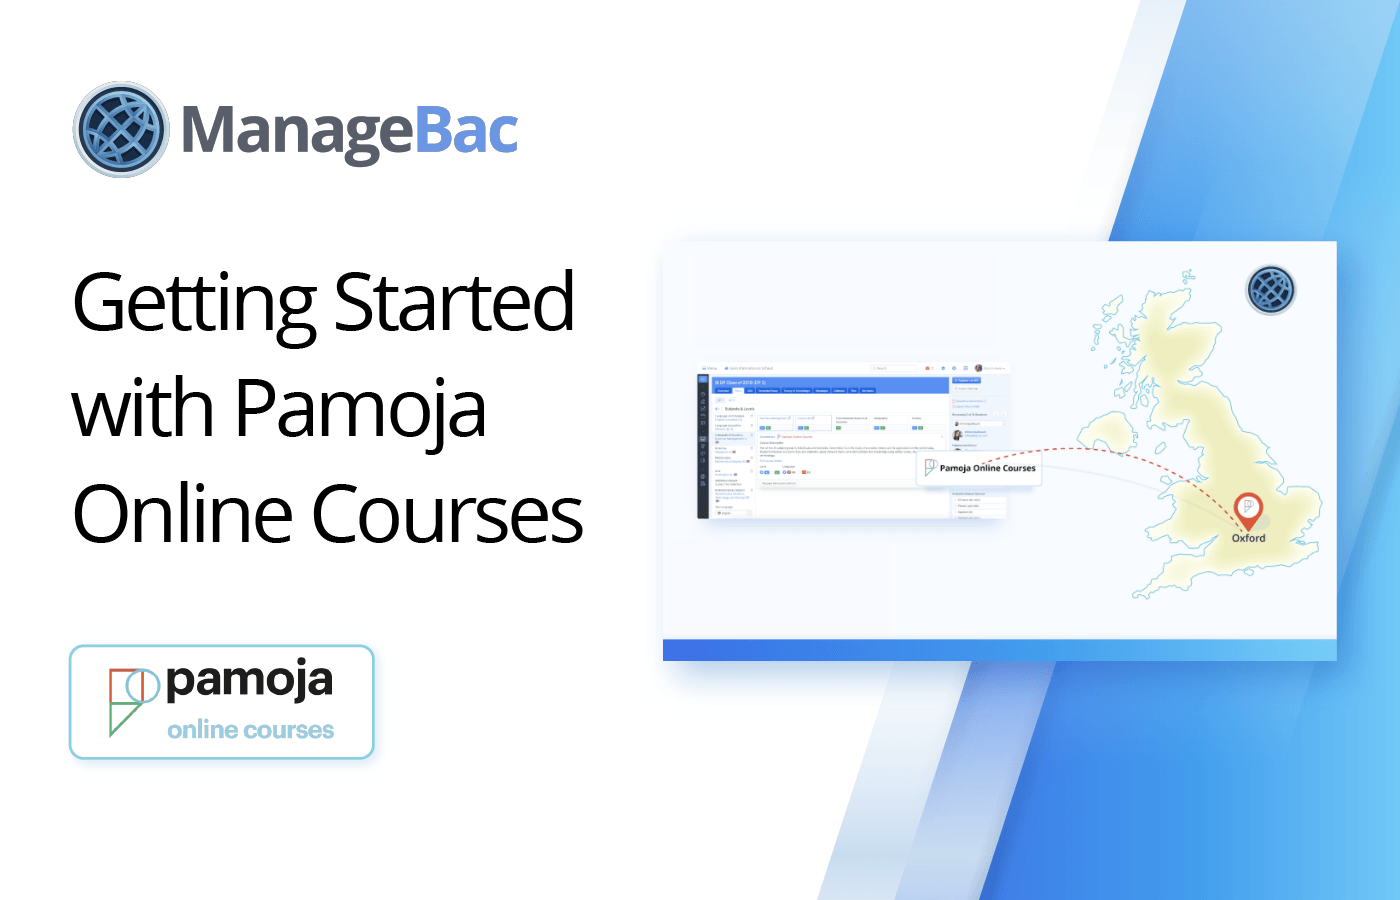 Getting Started with Pamoja Online Courses